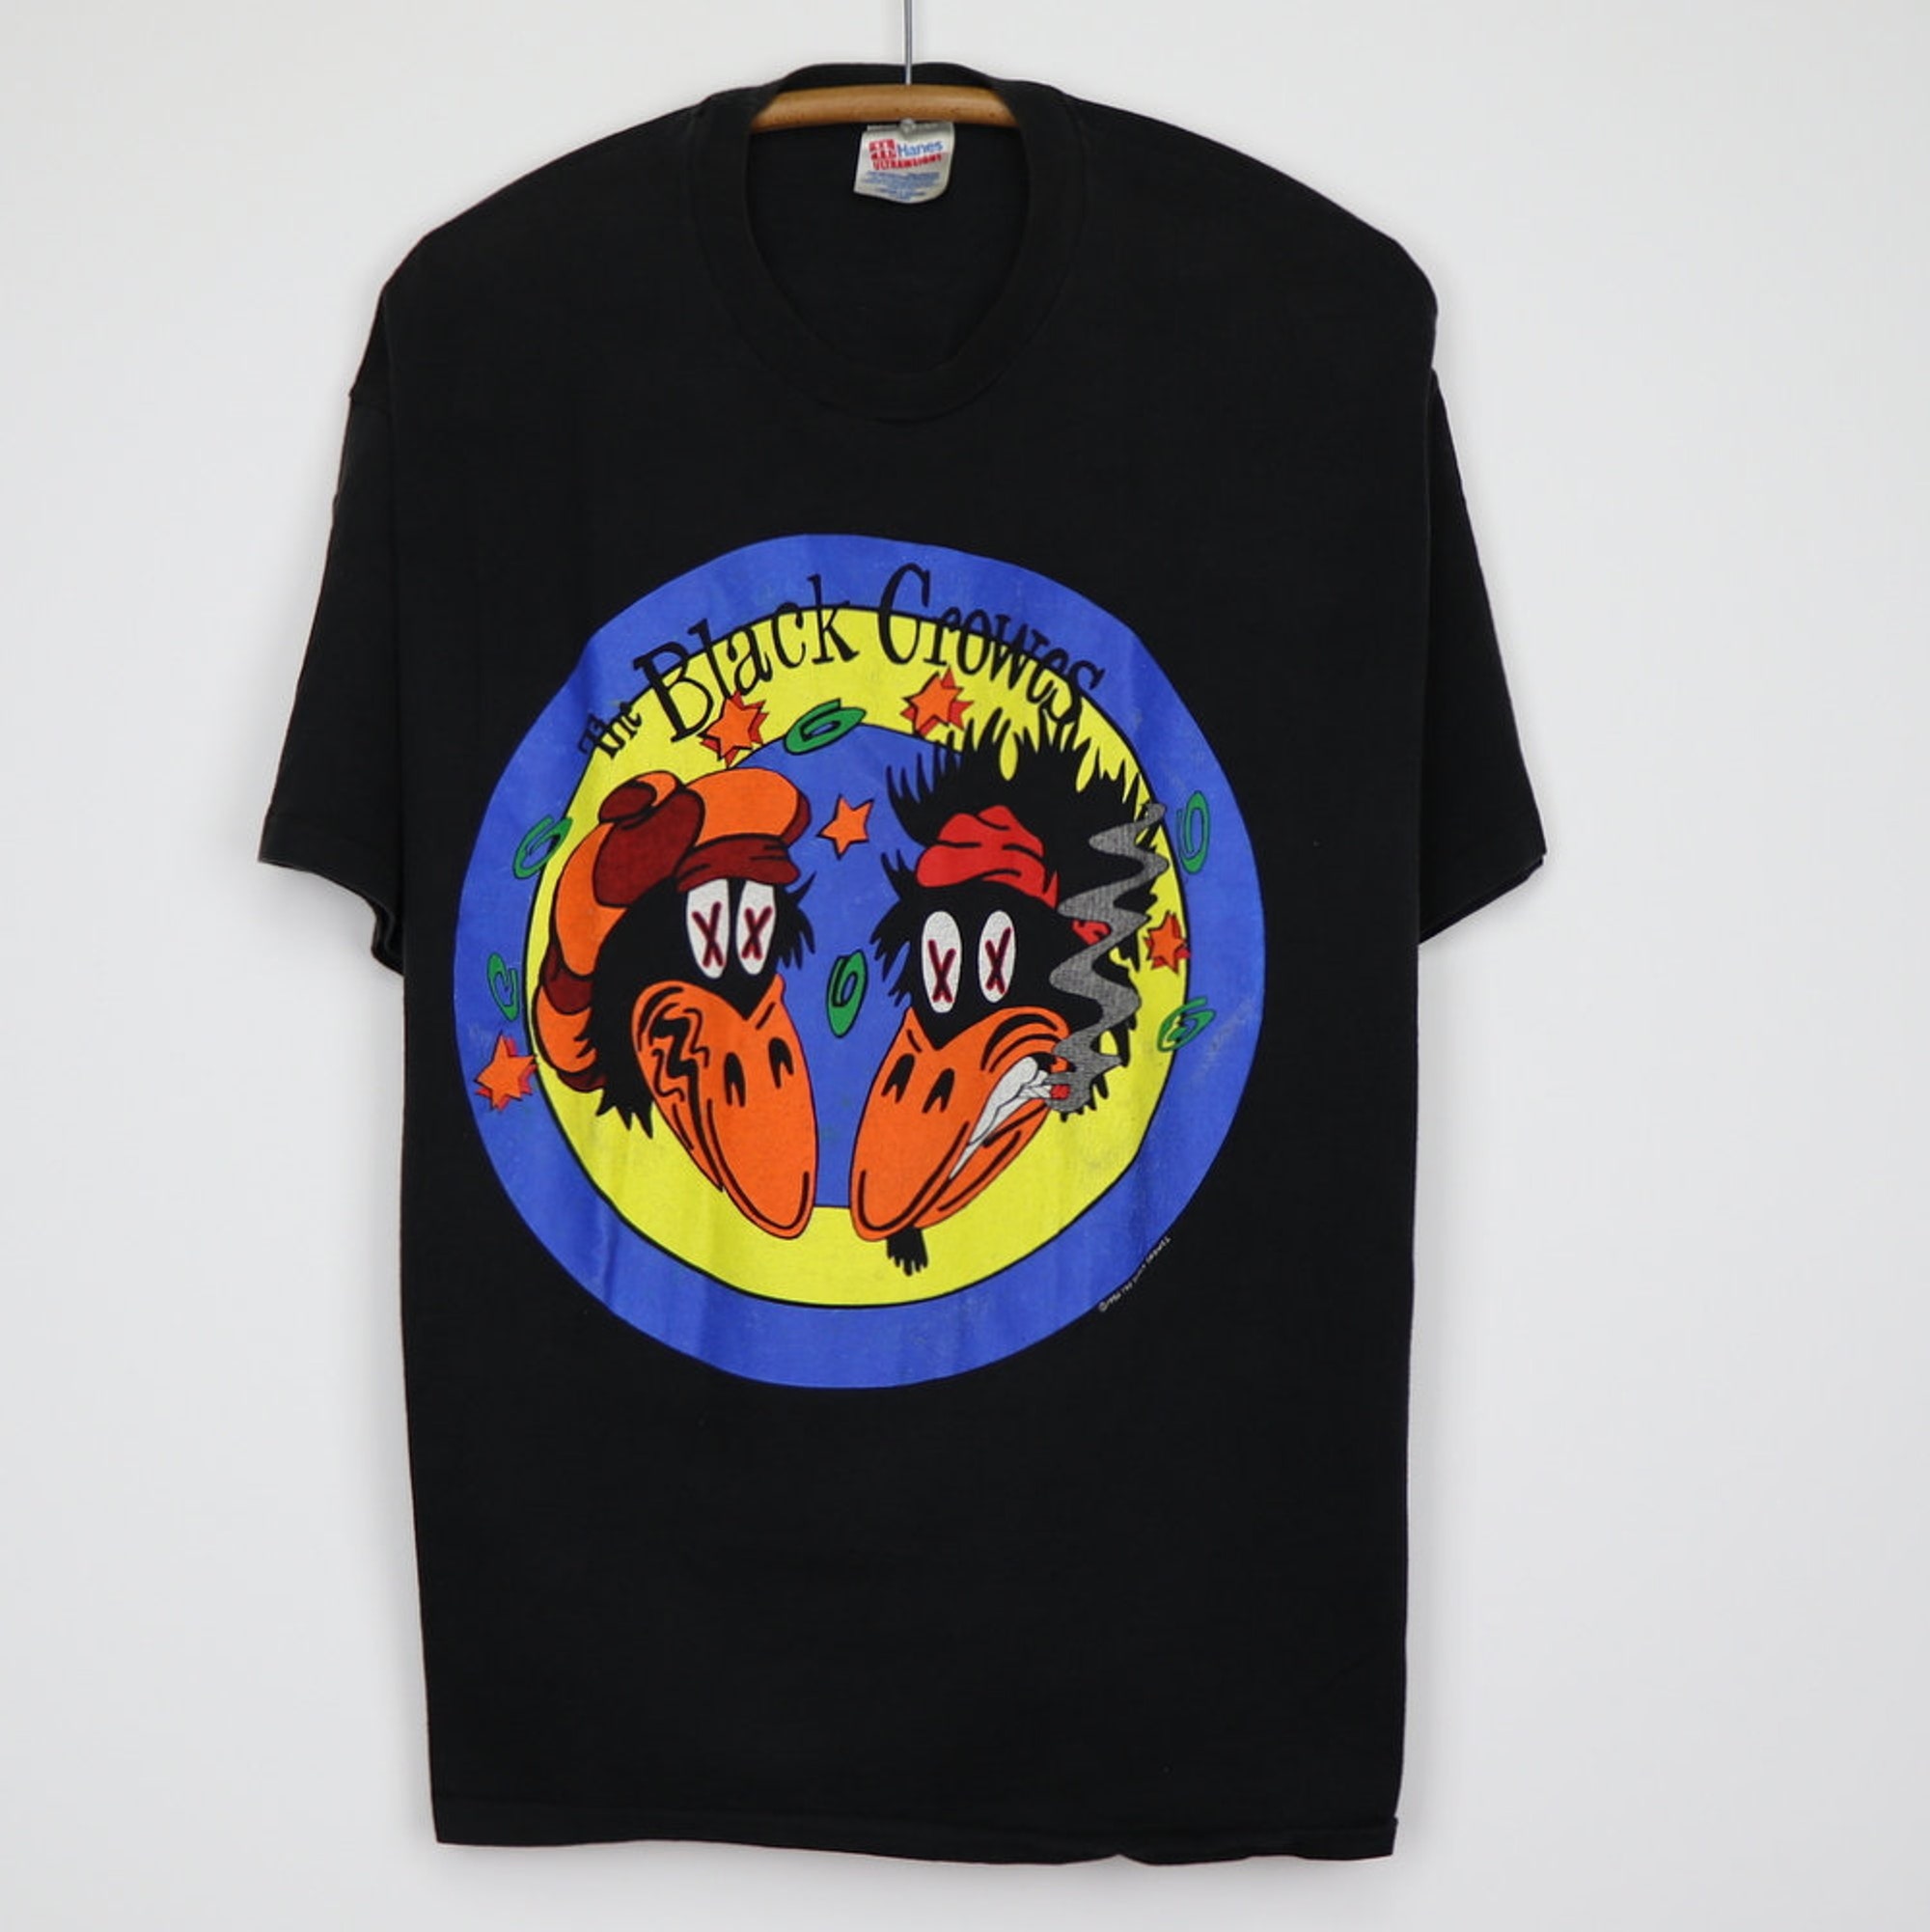 Discover vintage 1993 Black Crowes As High As The Moon Tour Shirt